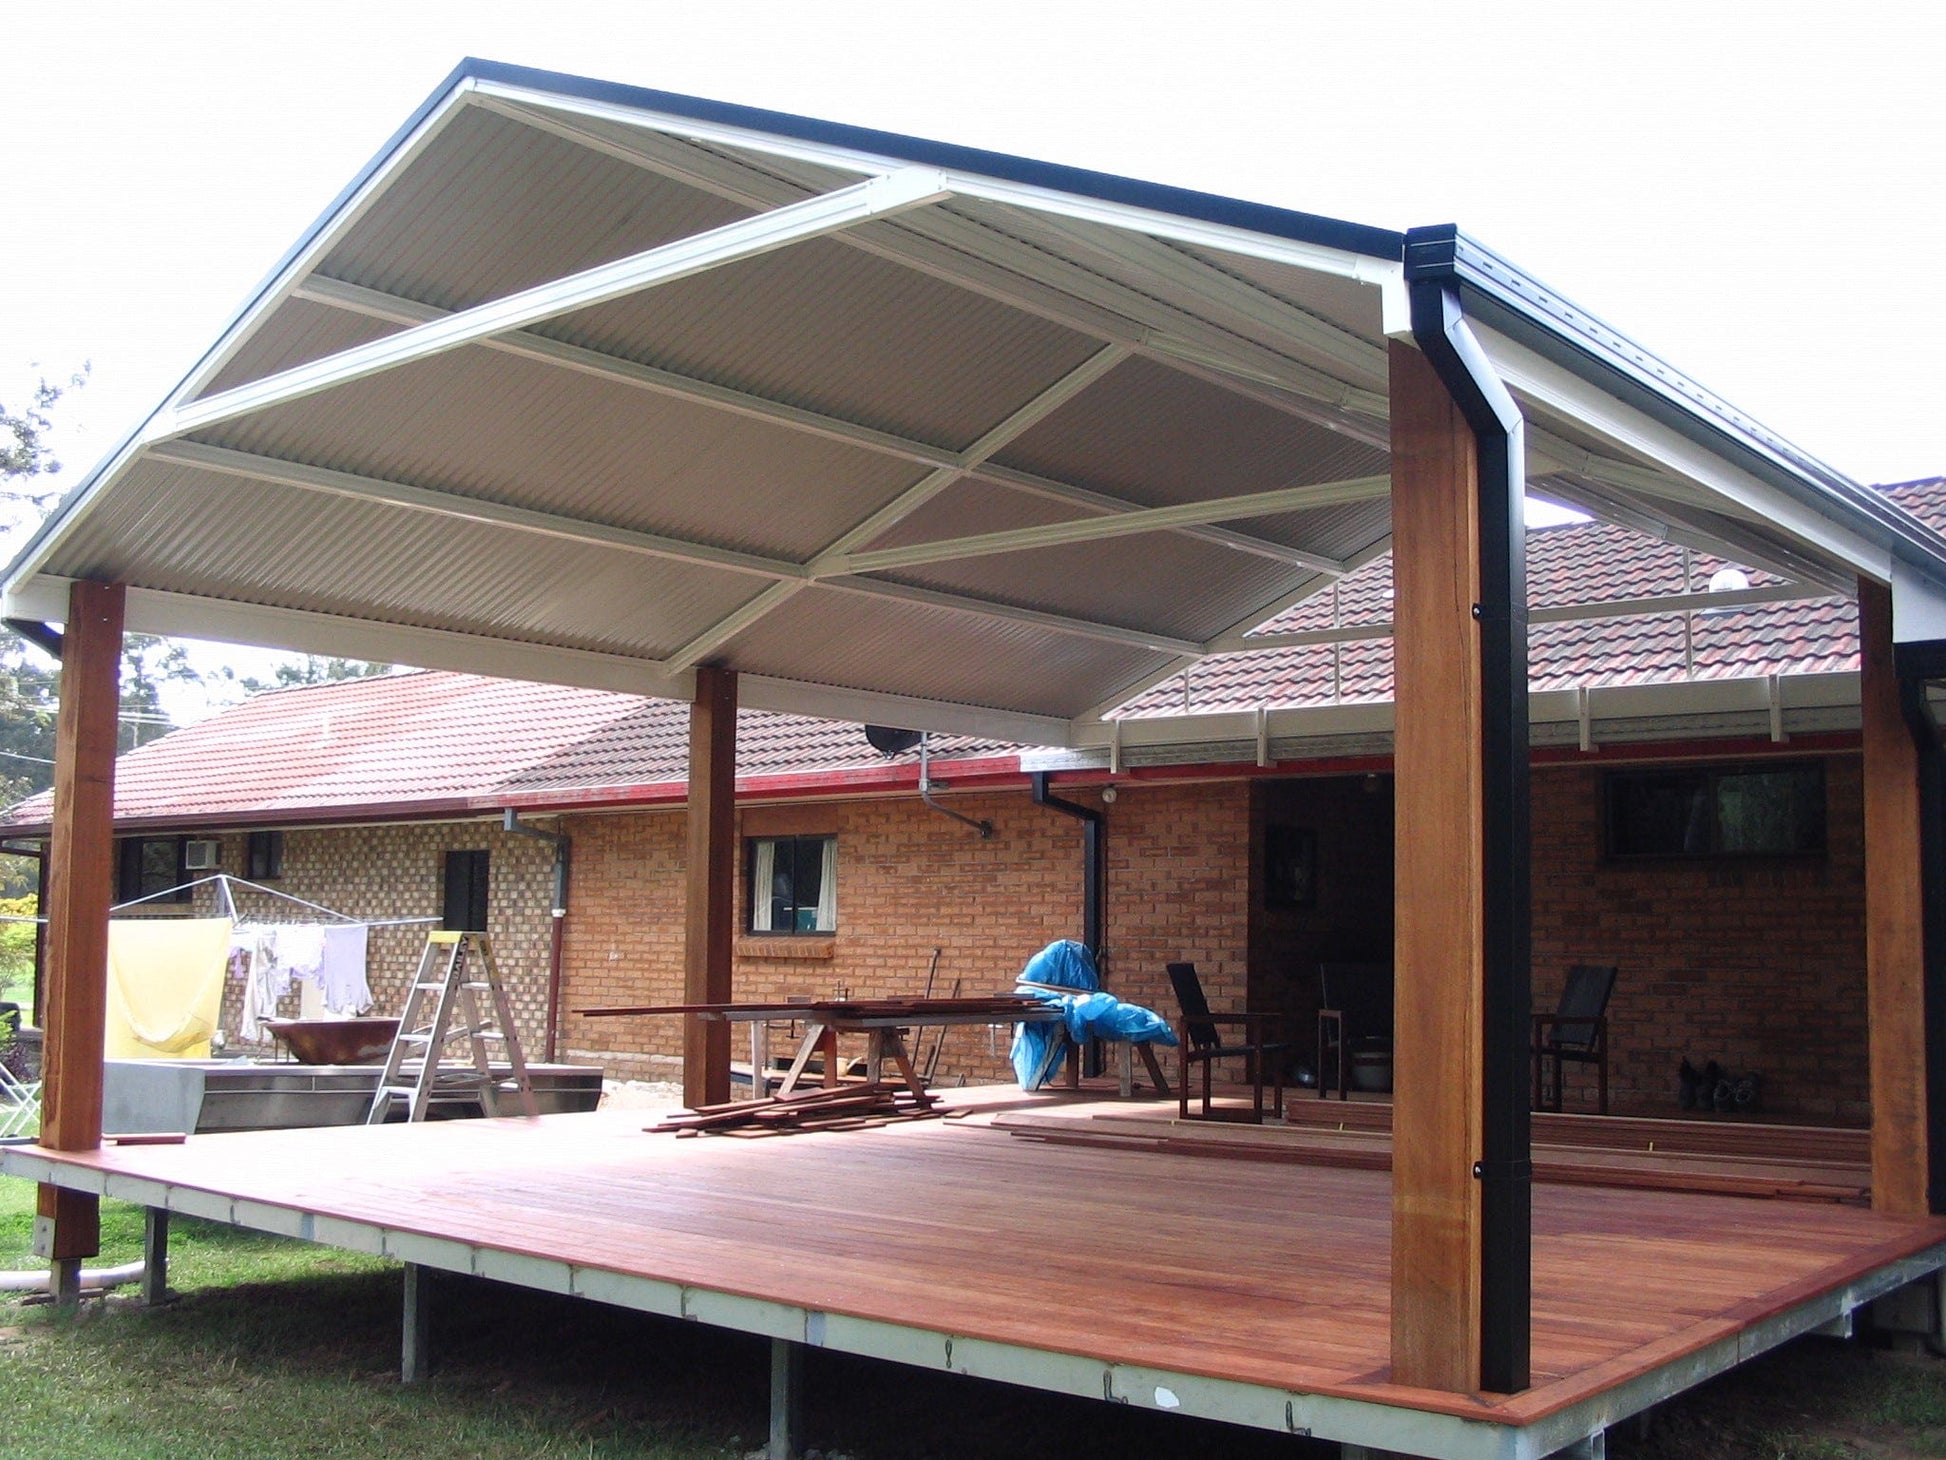 Non-Insulated Gable Patio - 6m x 4m- Supply & Install QHI National